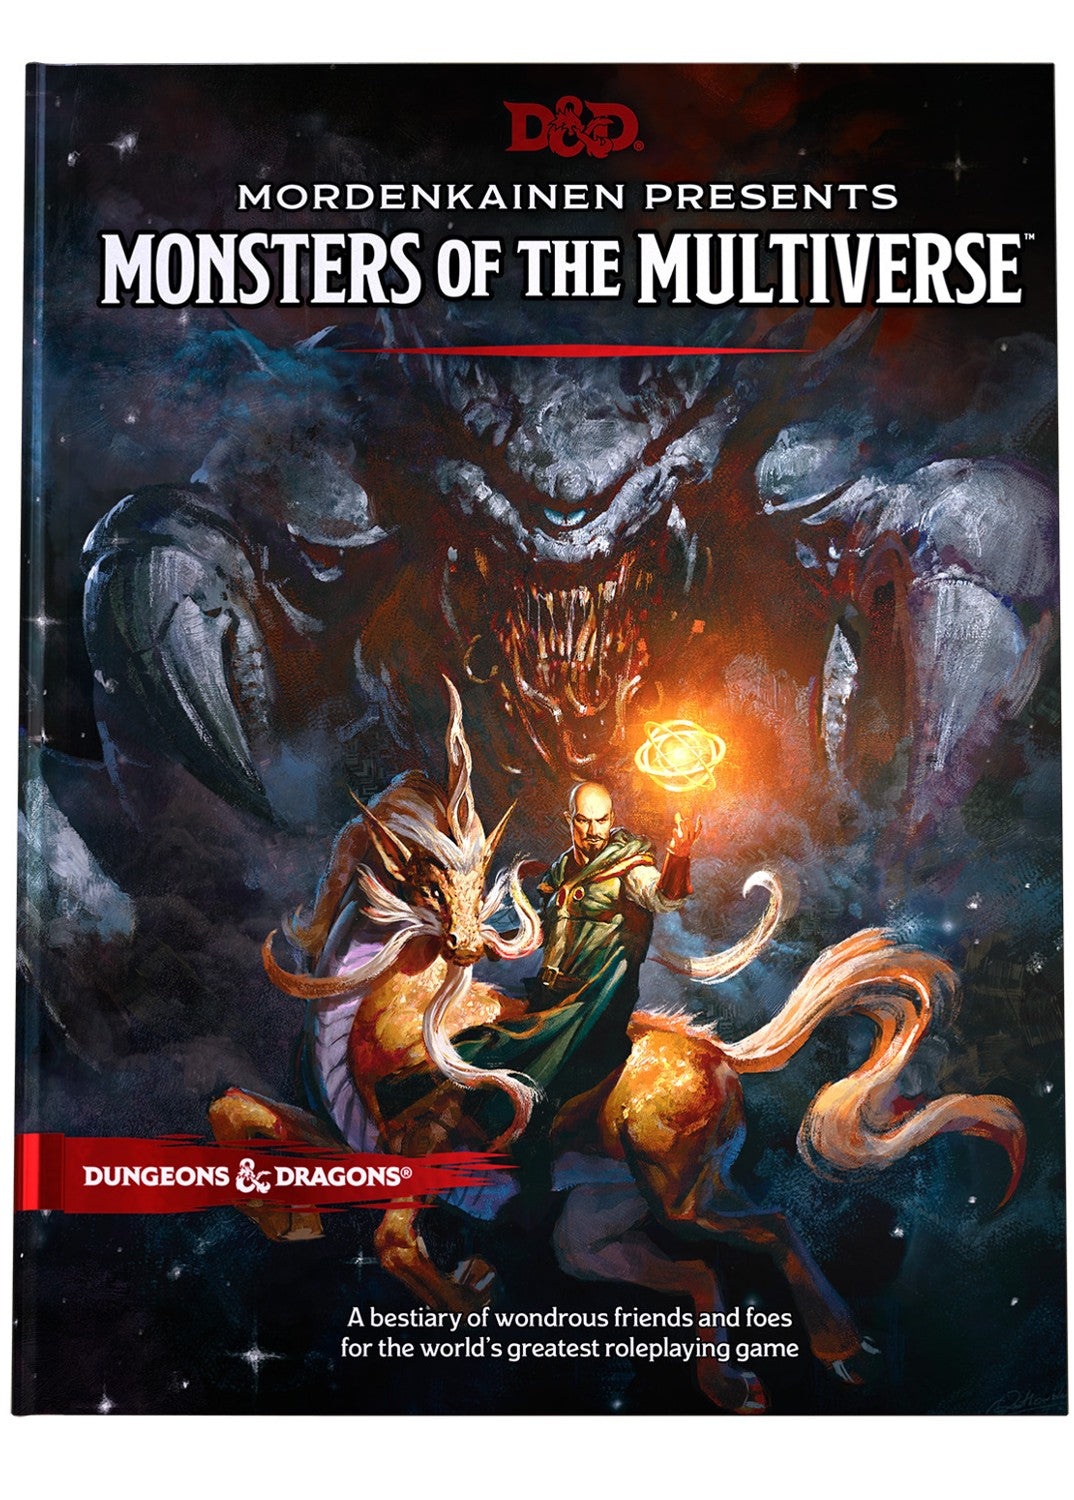 Dungeons & Dragons Mordenkainen Presents Monsters of the Multiverse